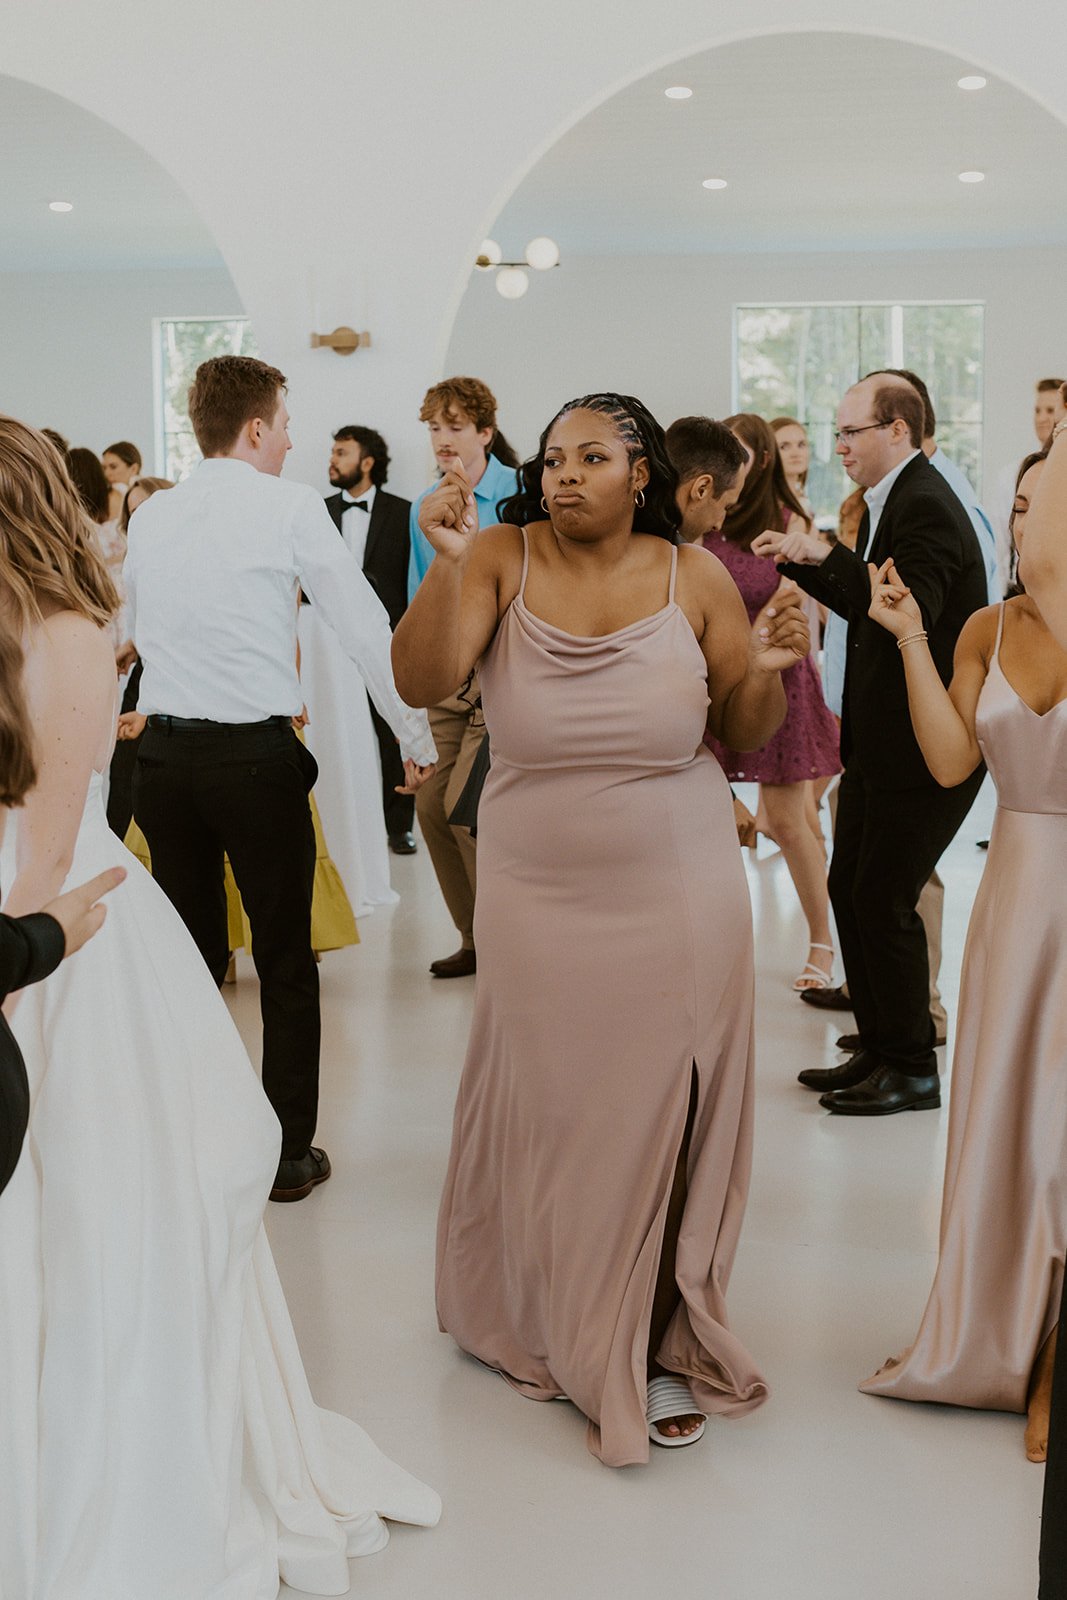 Bridesmaid enjoys a dance with her other bridesmaids.